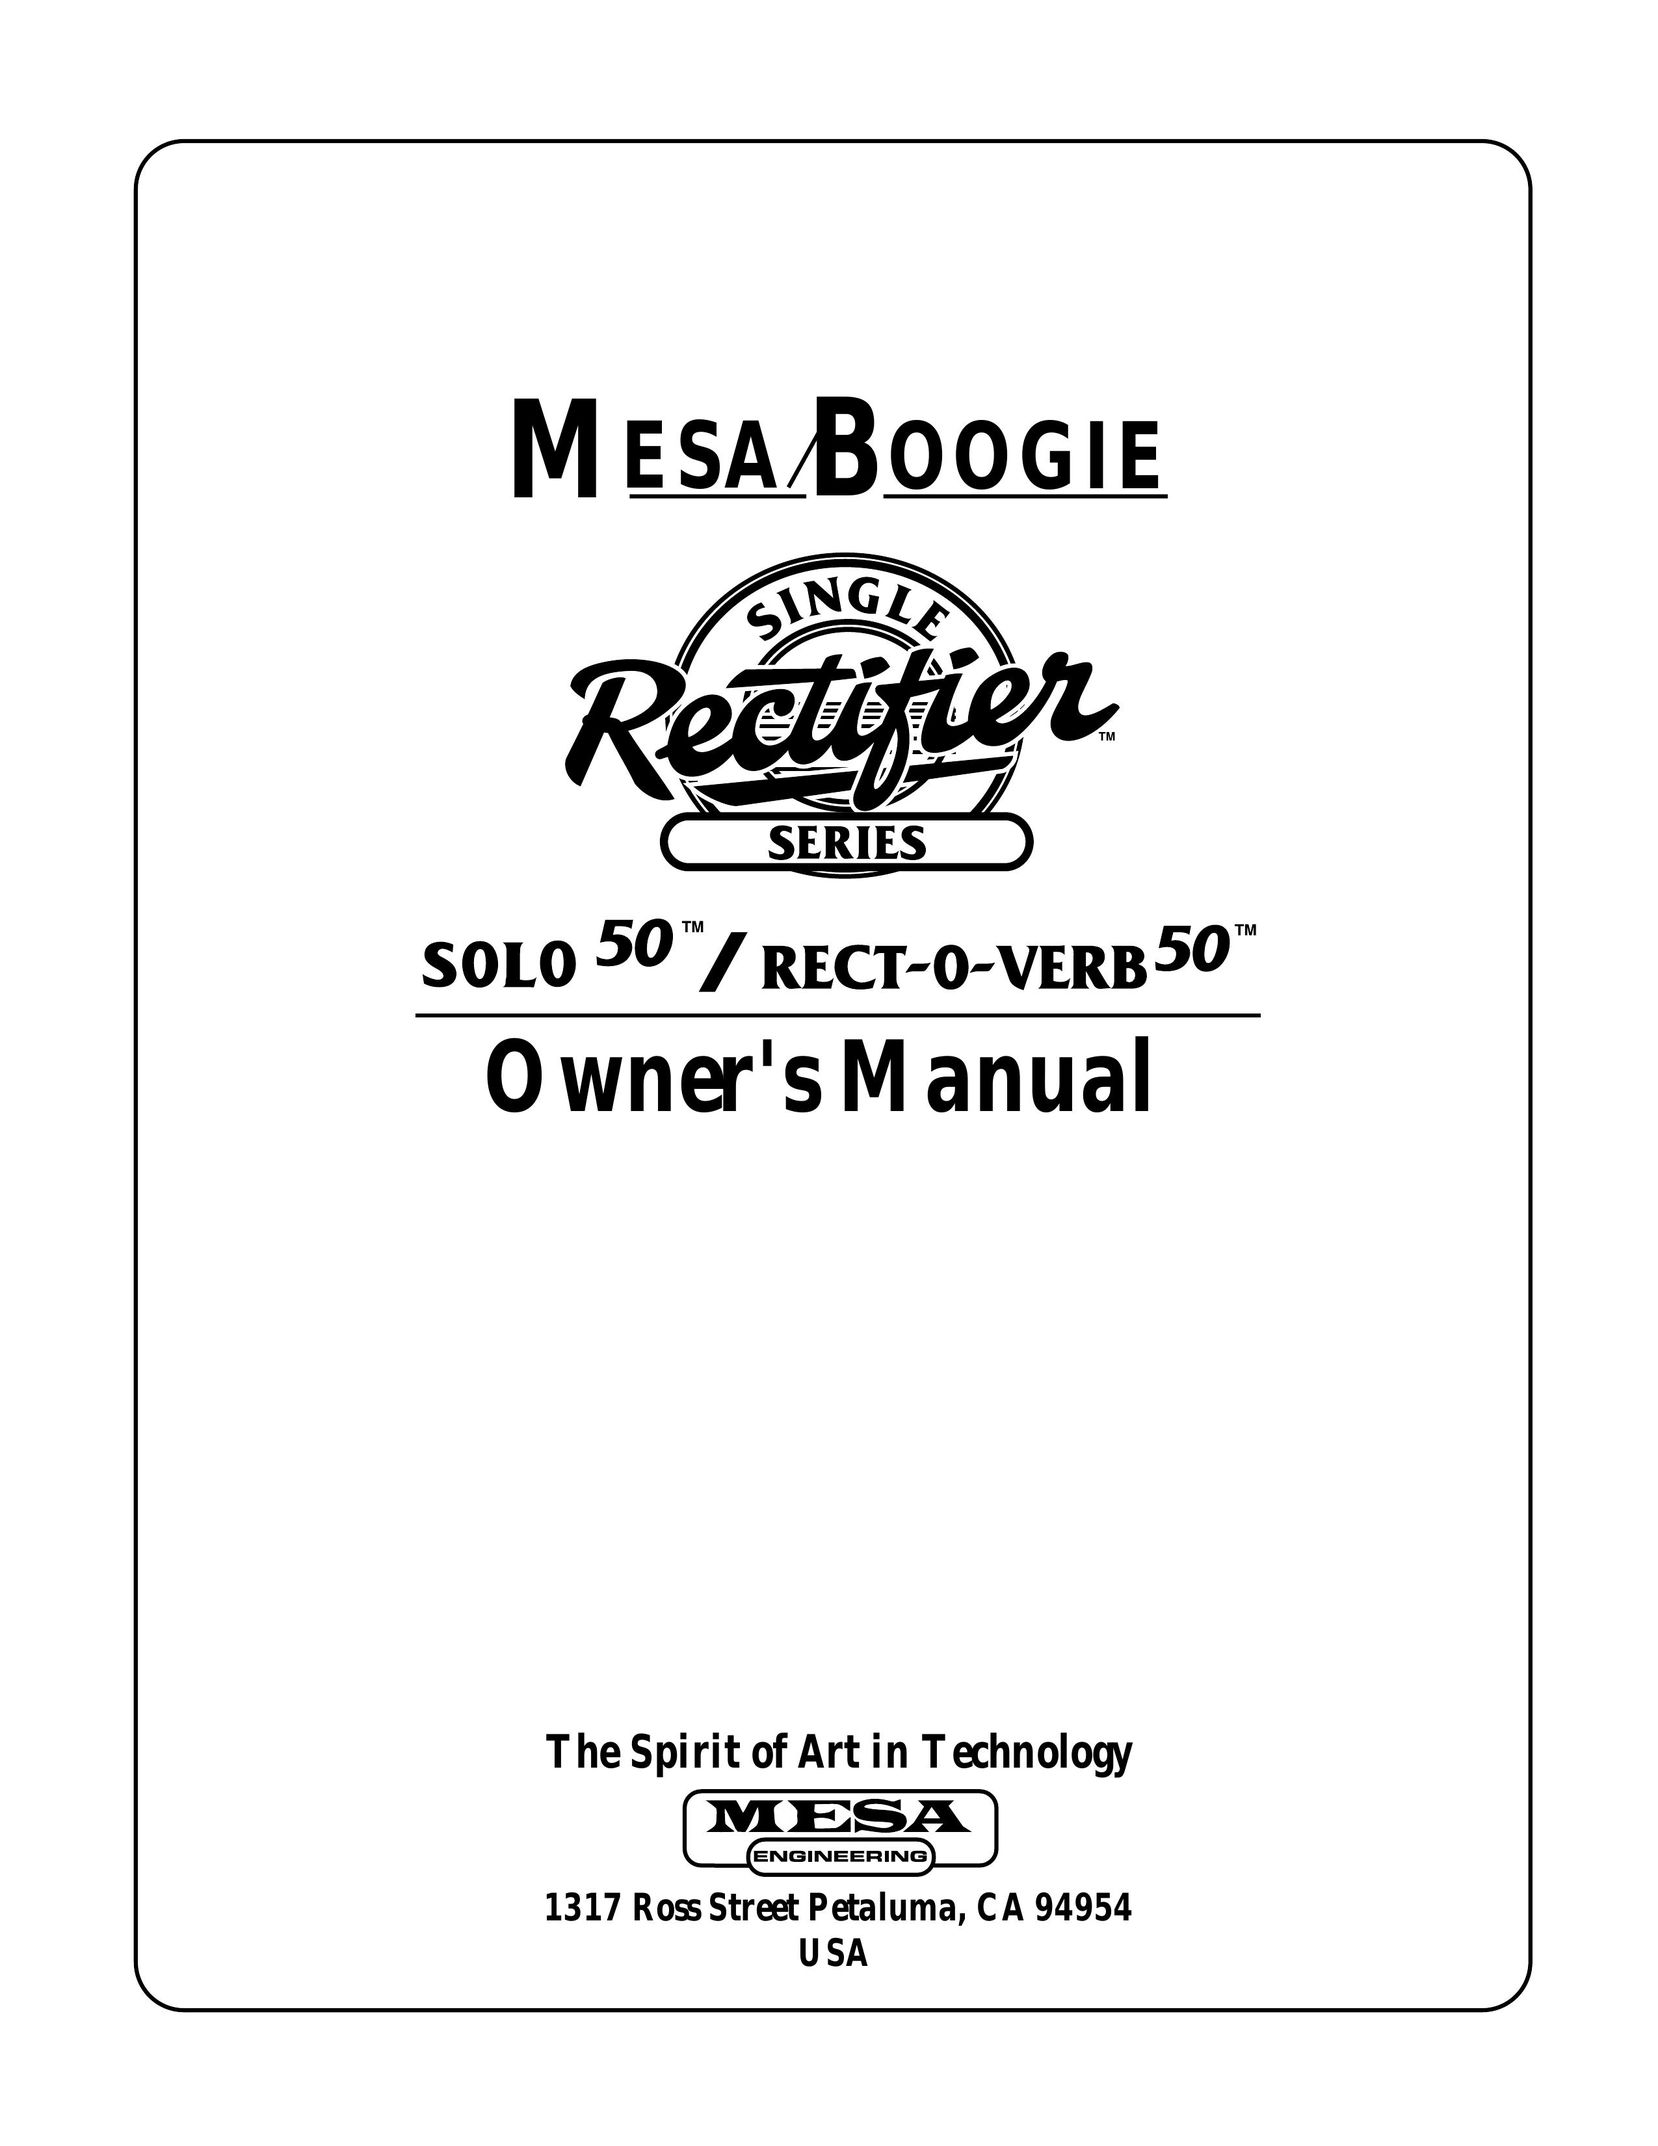 Mesa/Boogie SOLO 50 Stereo Receiver User Manual